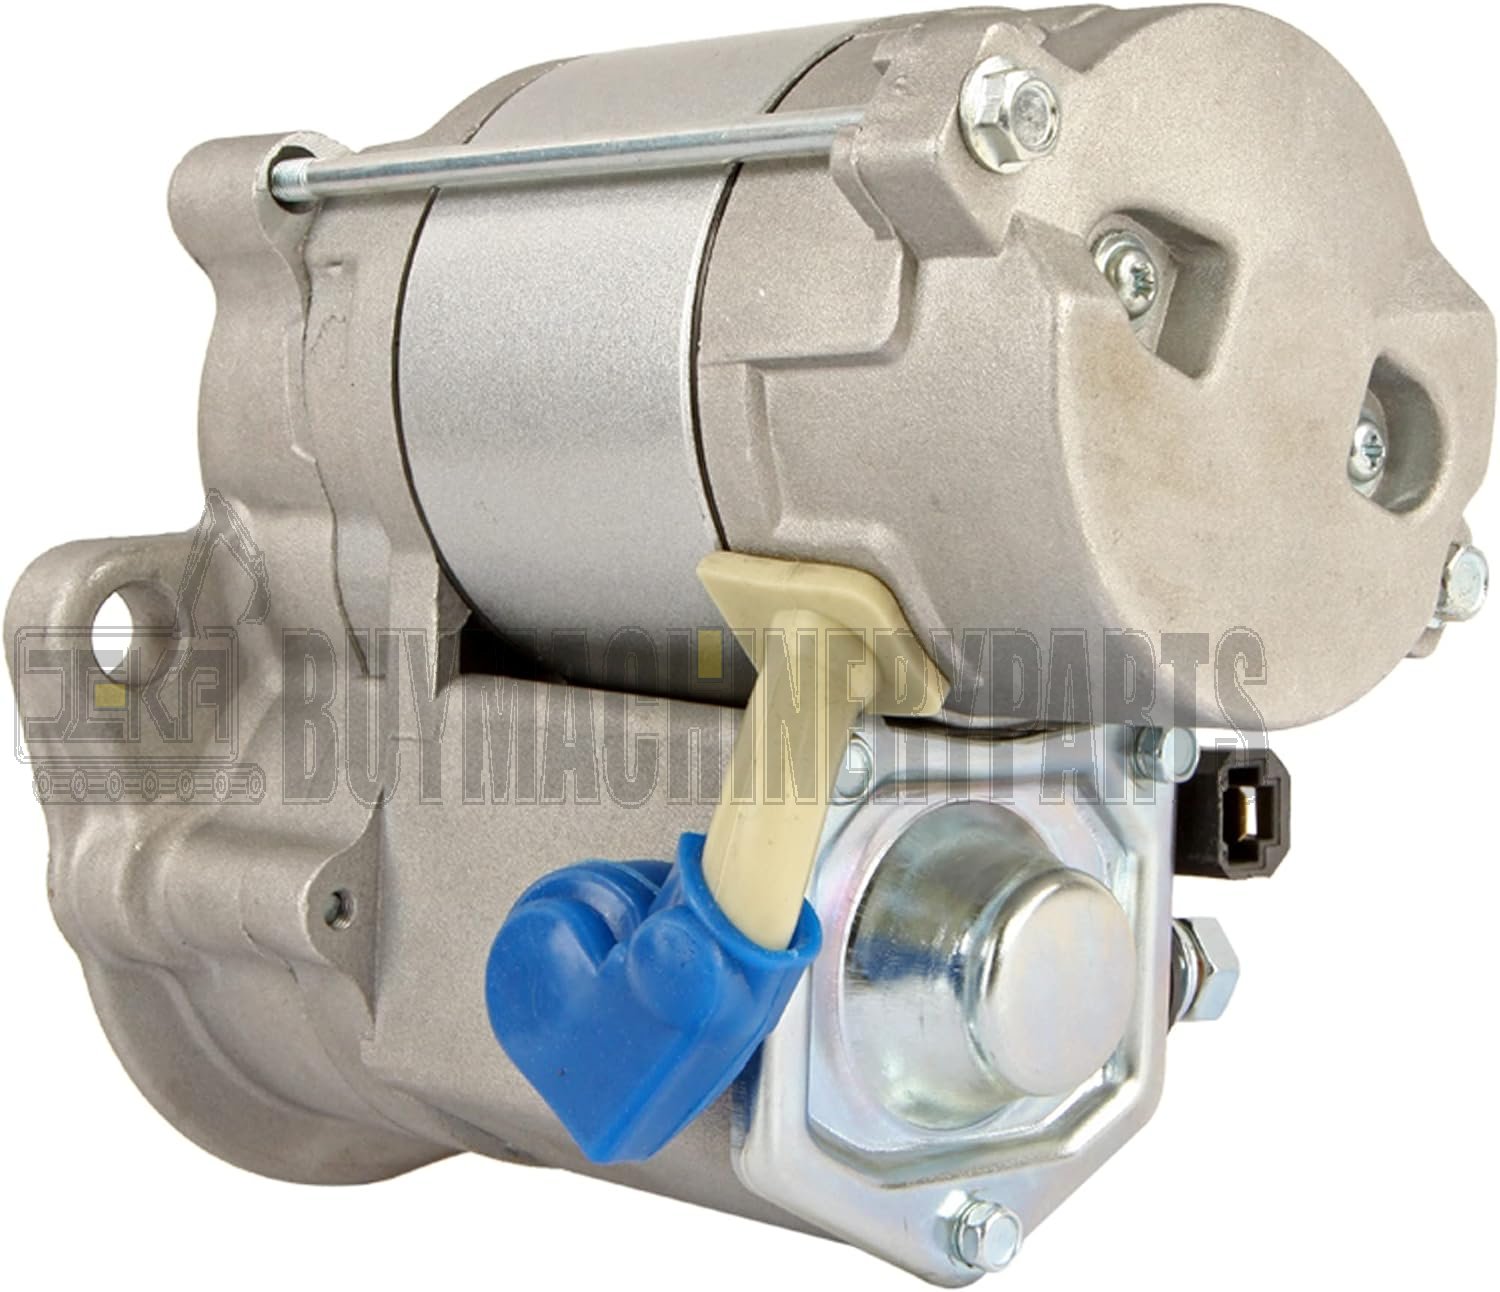 DB Electrical 410-52302 Starter Compatible With/Replacement For Kubota Carriers KC15, Tractor-Compact L2050 L225 L2350 L235 L245 L2650 L275 / Universal Inboard M-30/15321-63015, 15321-63016